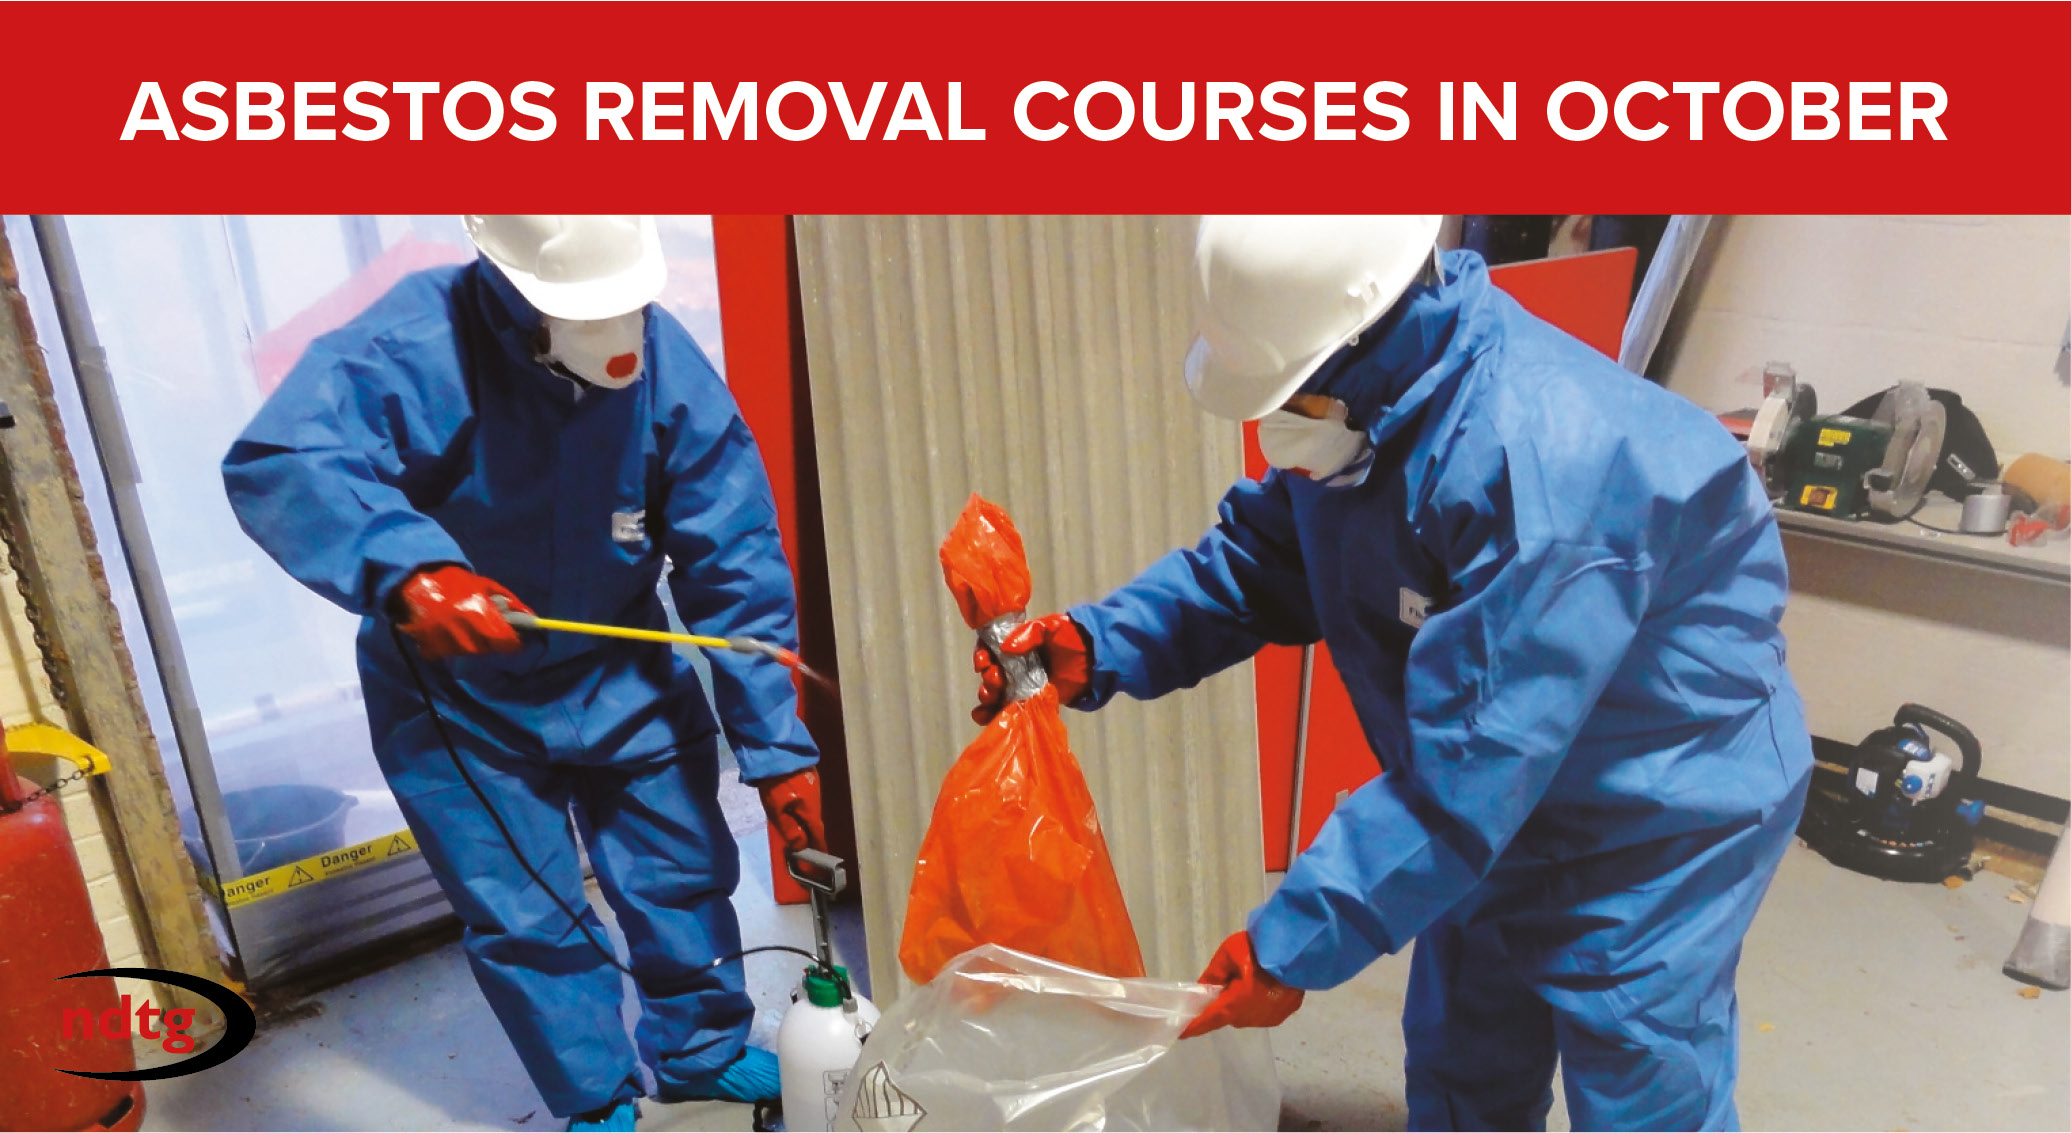 Non-Licensed Asbestos Removal Courses with NDTG